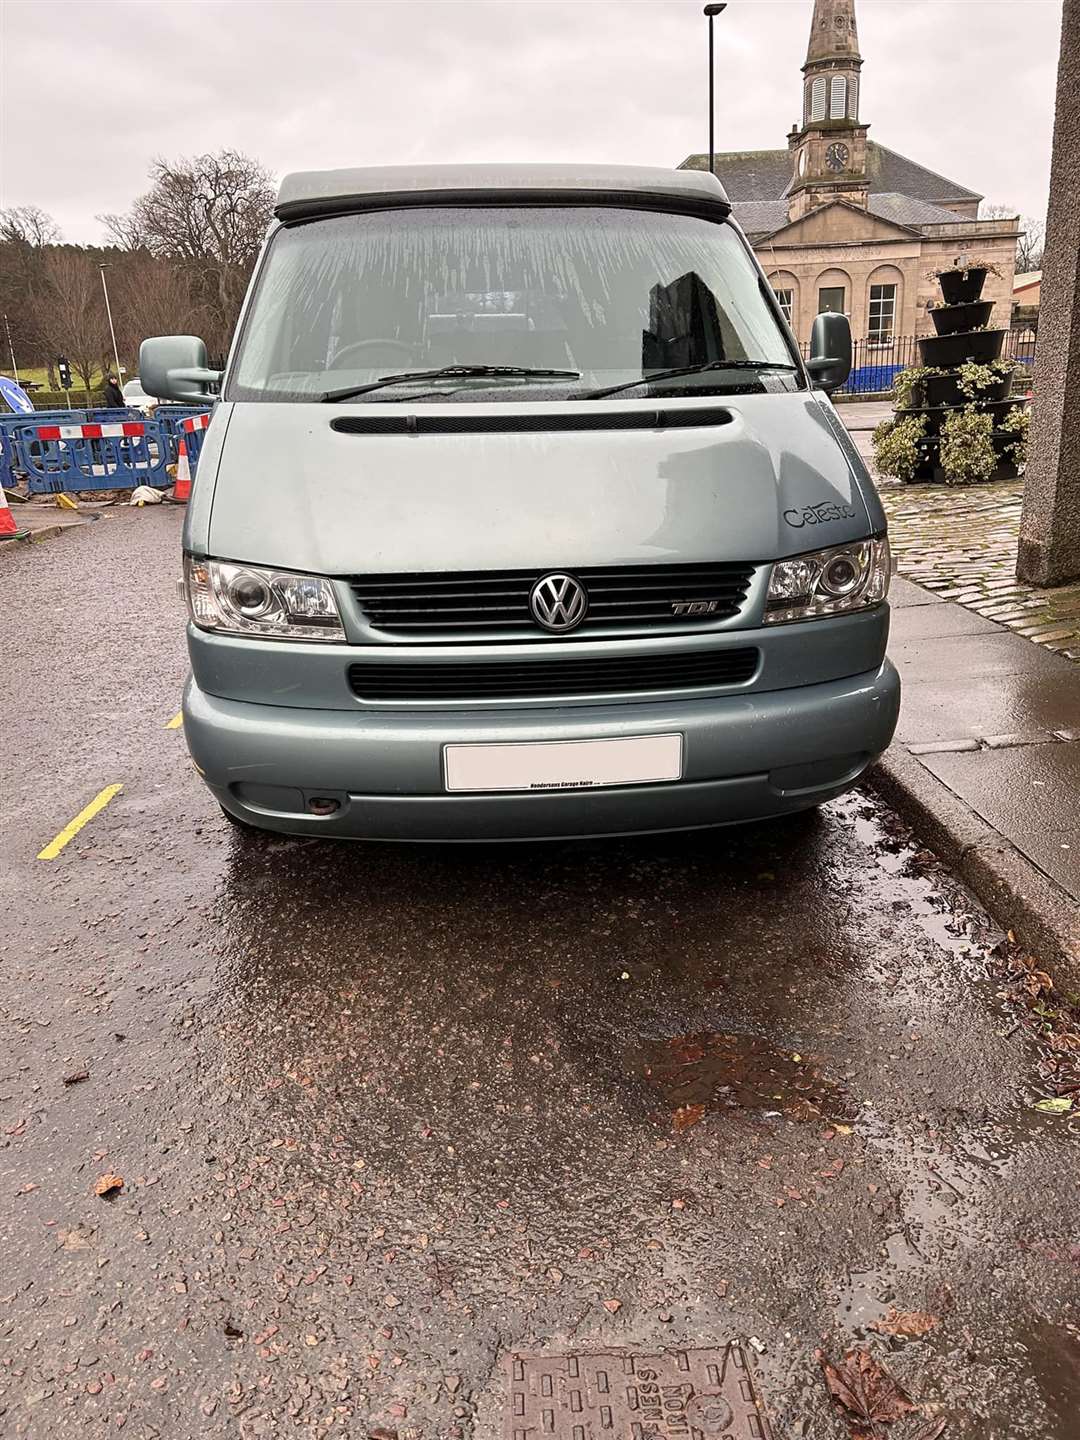 Vehicles without blue badges regularly take up the disabled space at Forres House Community Centre.